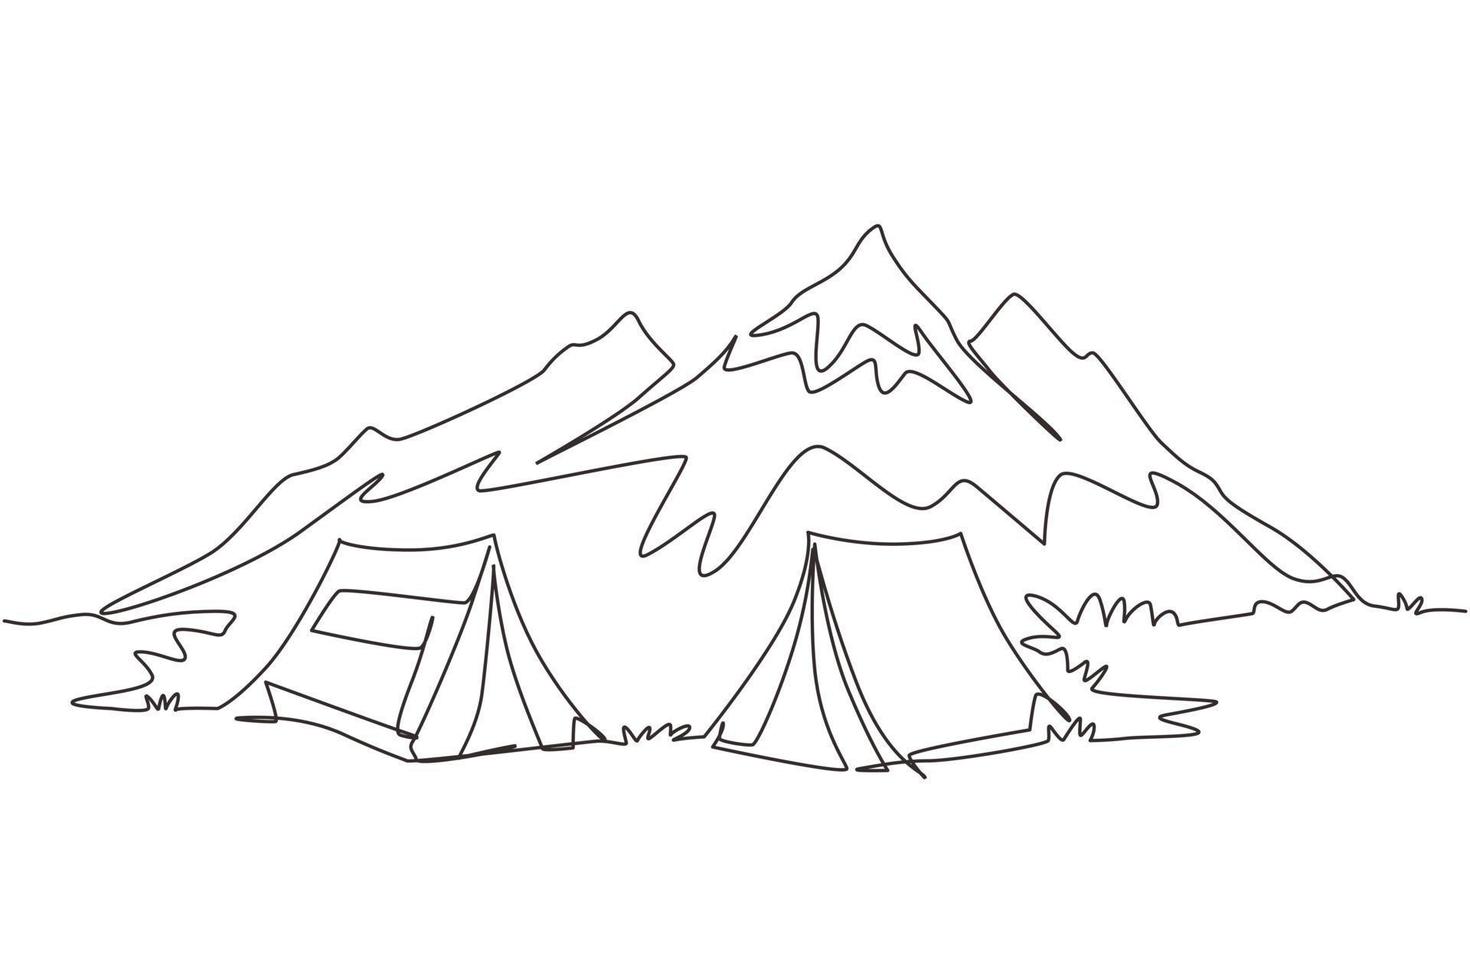 Continuous one line drawing two tents in adventure camping night landscape. Tent camper tourist forest mountain expedition. Travel and vacation concept. Single line draw design vector illustration